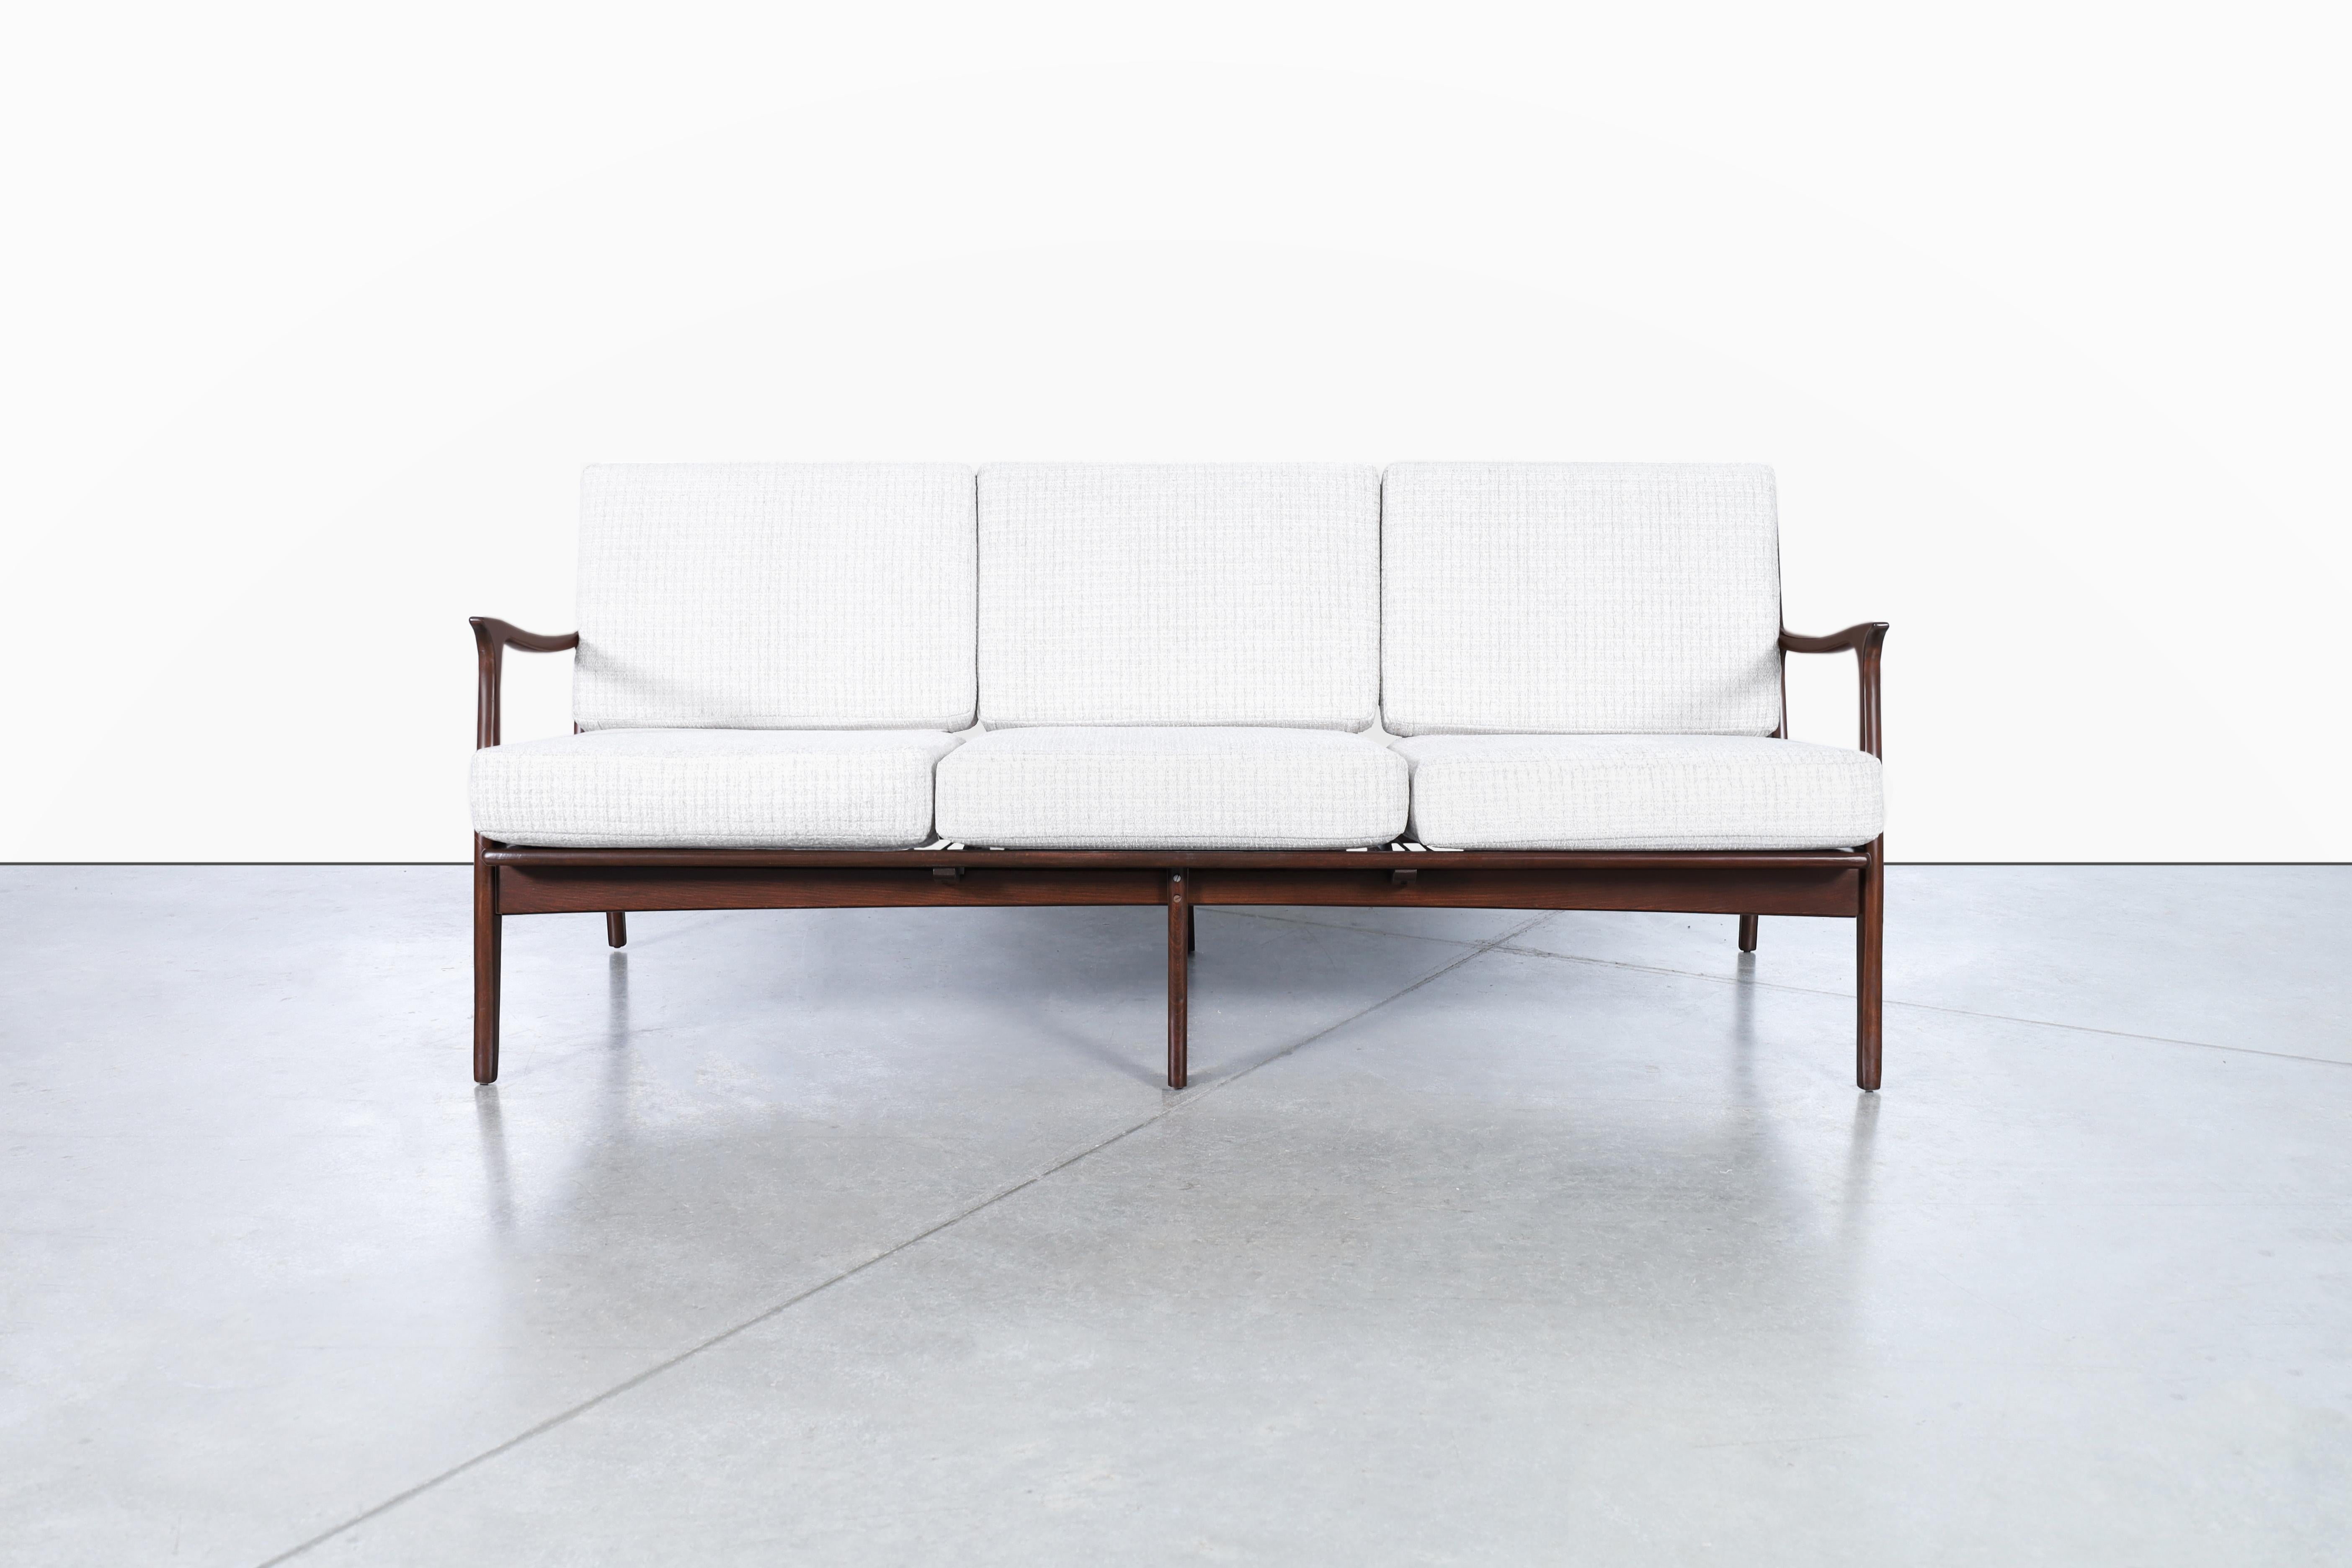 This vintage walnut sculptural sofa manufactured in Italy is a true masterpiece that will elevate any living space to a whole new level of elegance. Handcrafted from high-quality walnut wood, the sculptural frame of this sofa is a true work of art